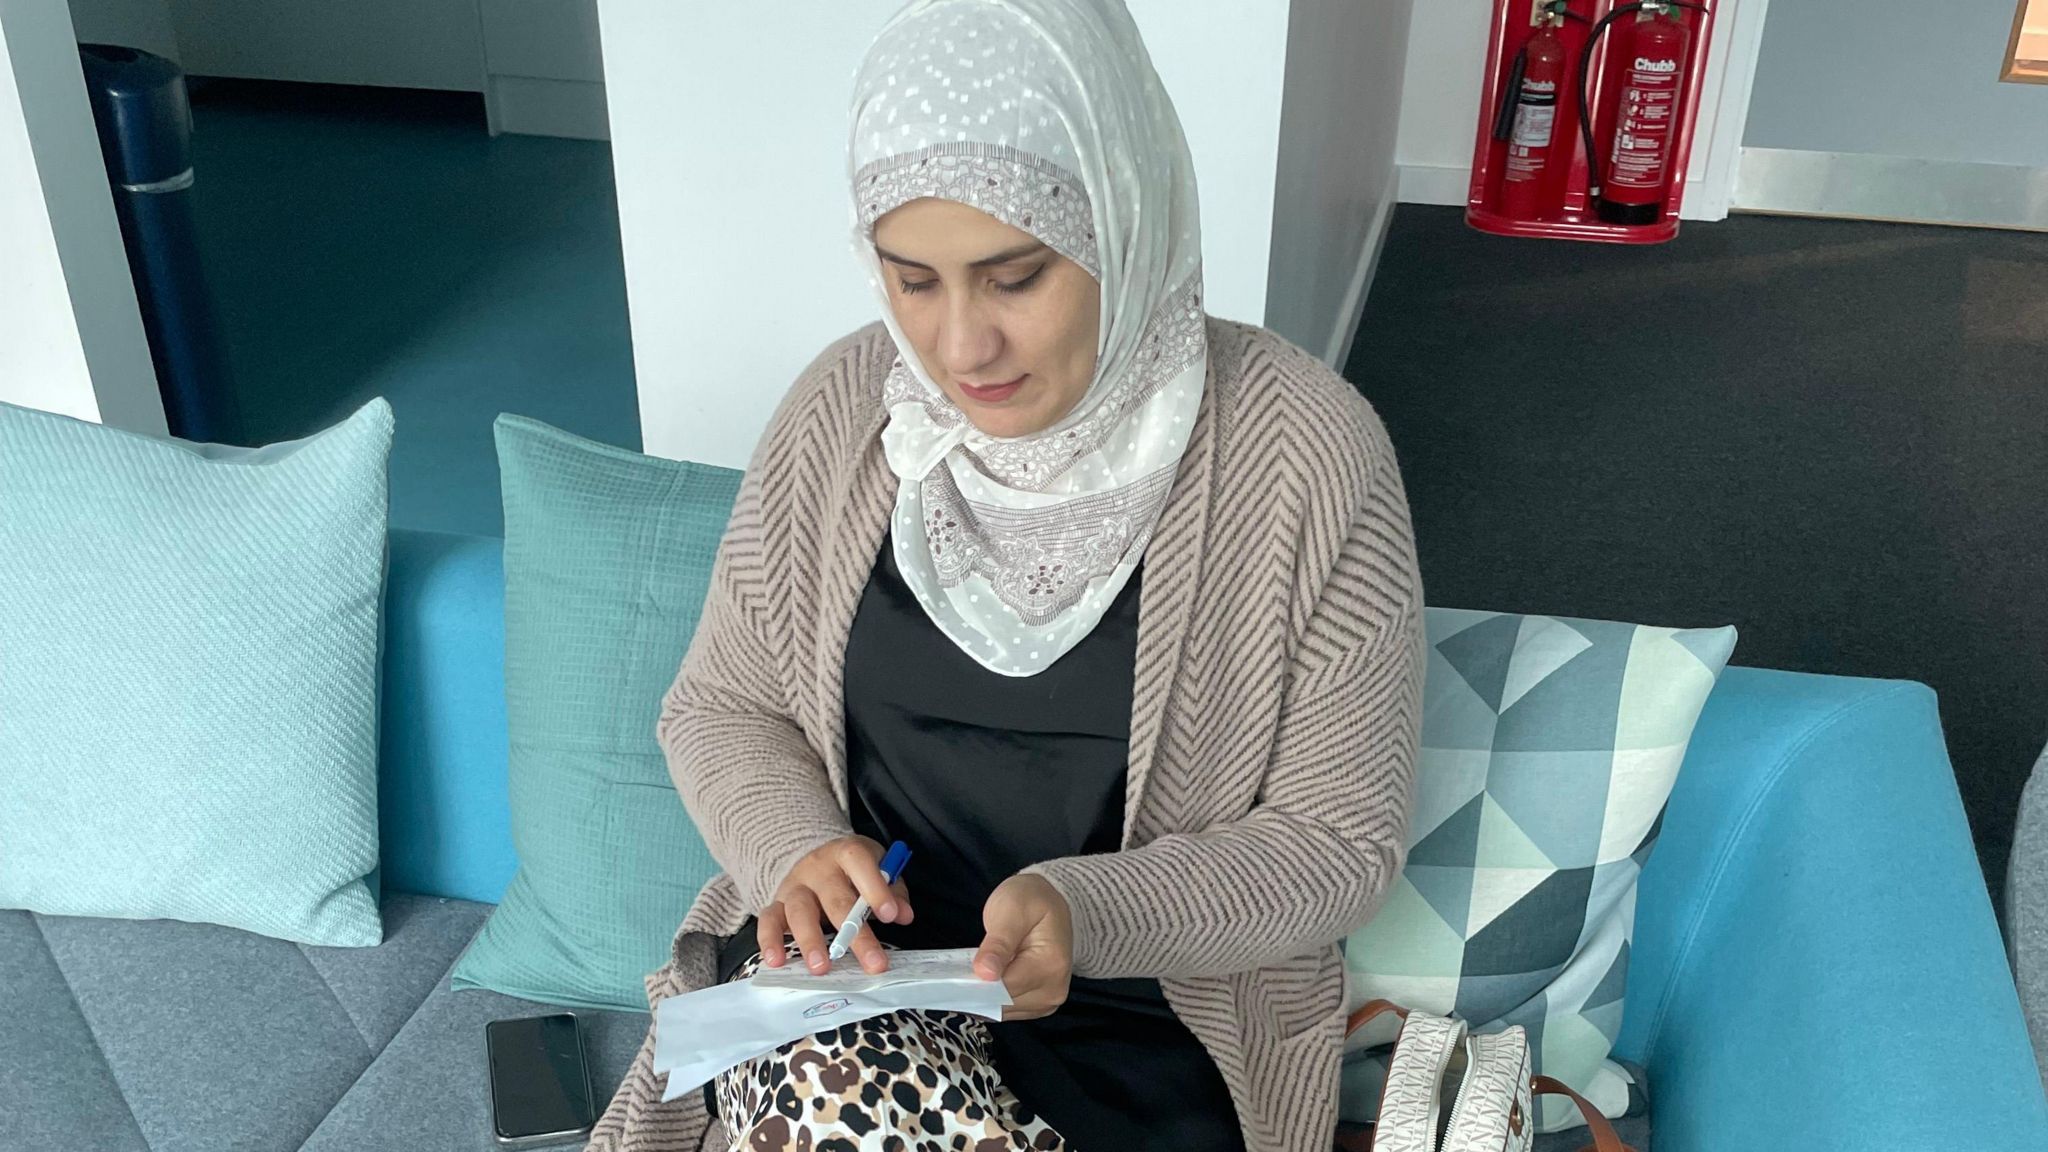 A young woman wearing a hijab, sitting on a sofa and working with a pen and paper